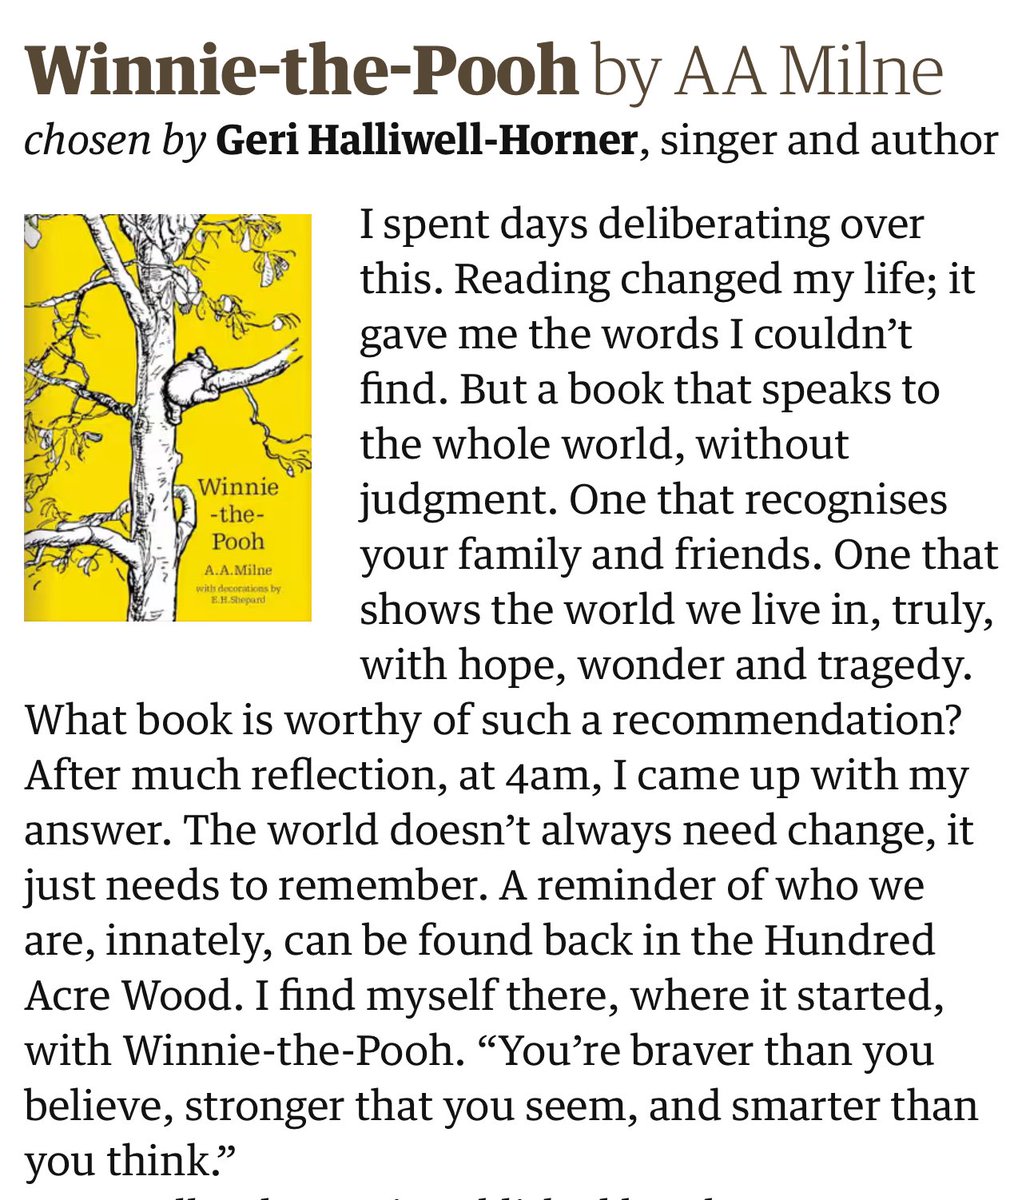 Geri Halliwell, there, ending her recommendation of AA Milne’s Winnie-the-Pooh with a quote that isn’t, in fact, from AA Milne’s Winnie-the-Pooh. It’s from a Disney Winnie-the-Pooh cartoon that isn’t even based on any of the books.